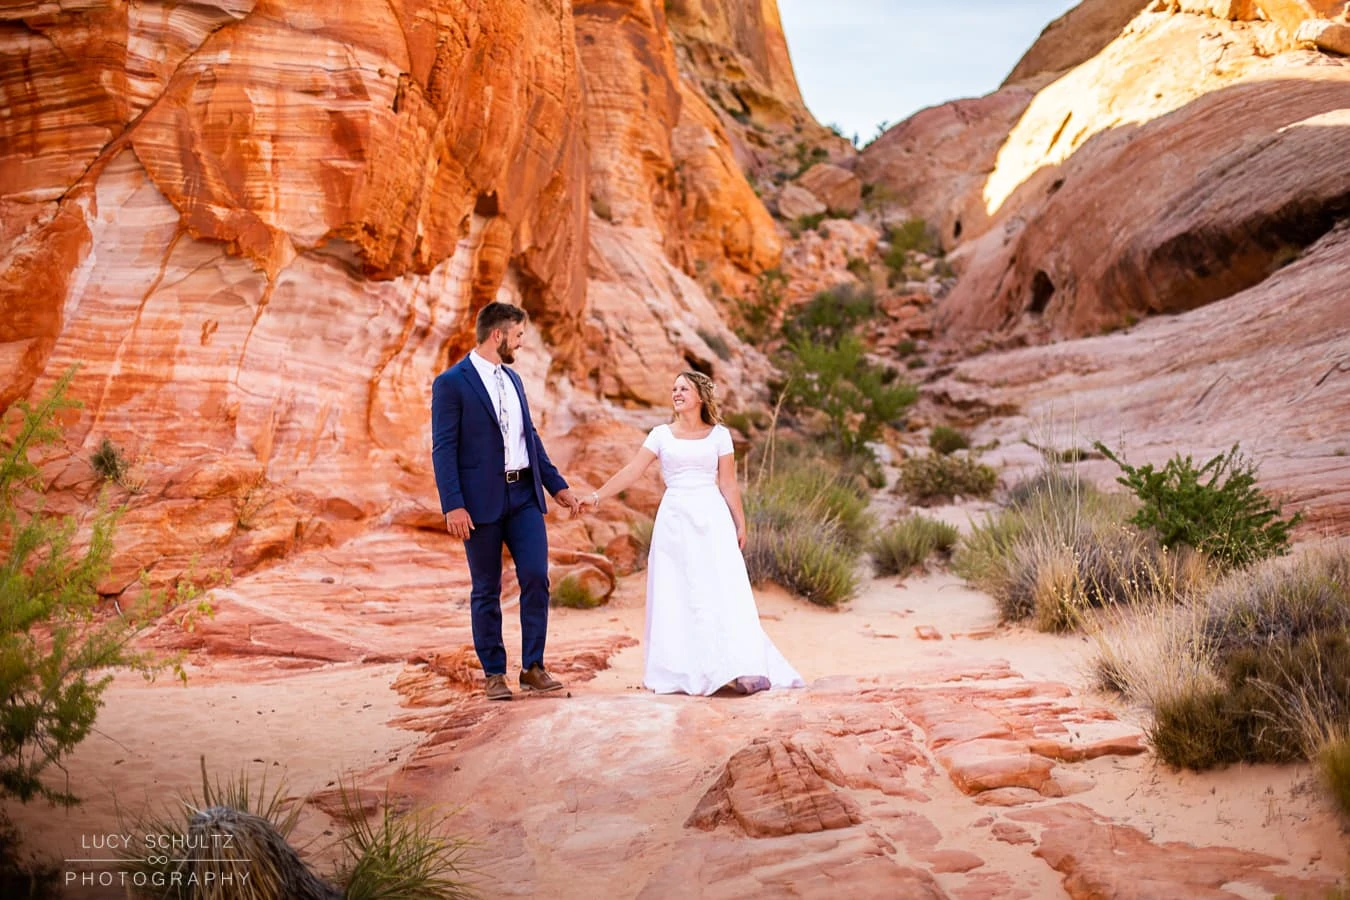 An elopement bride and groom walk through the colorful desert rocks of Valley of Fire state park in Nevada.